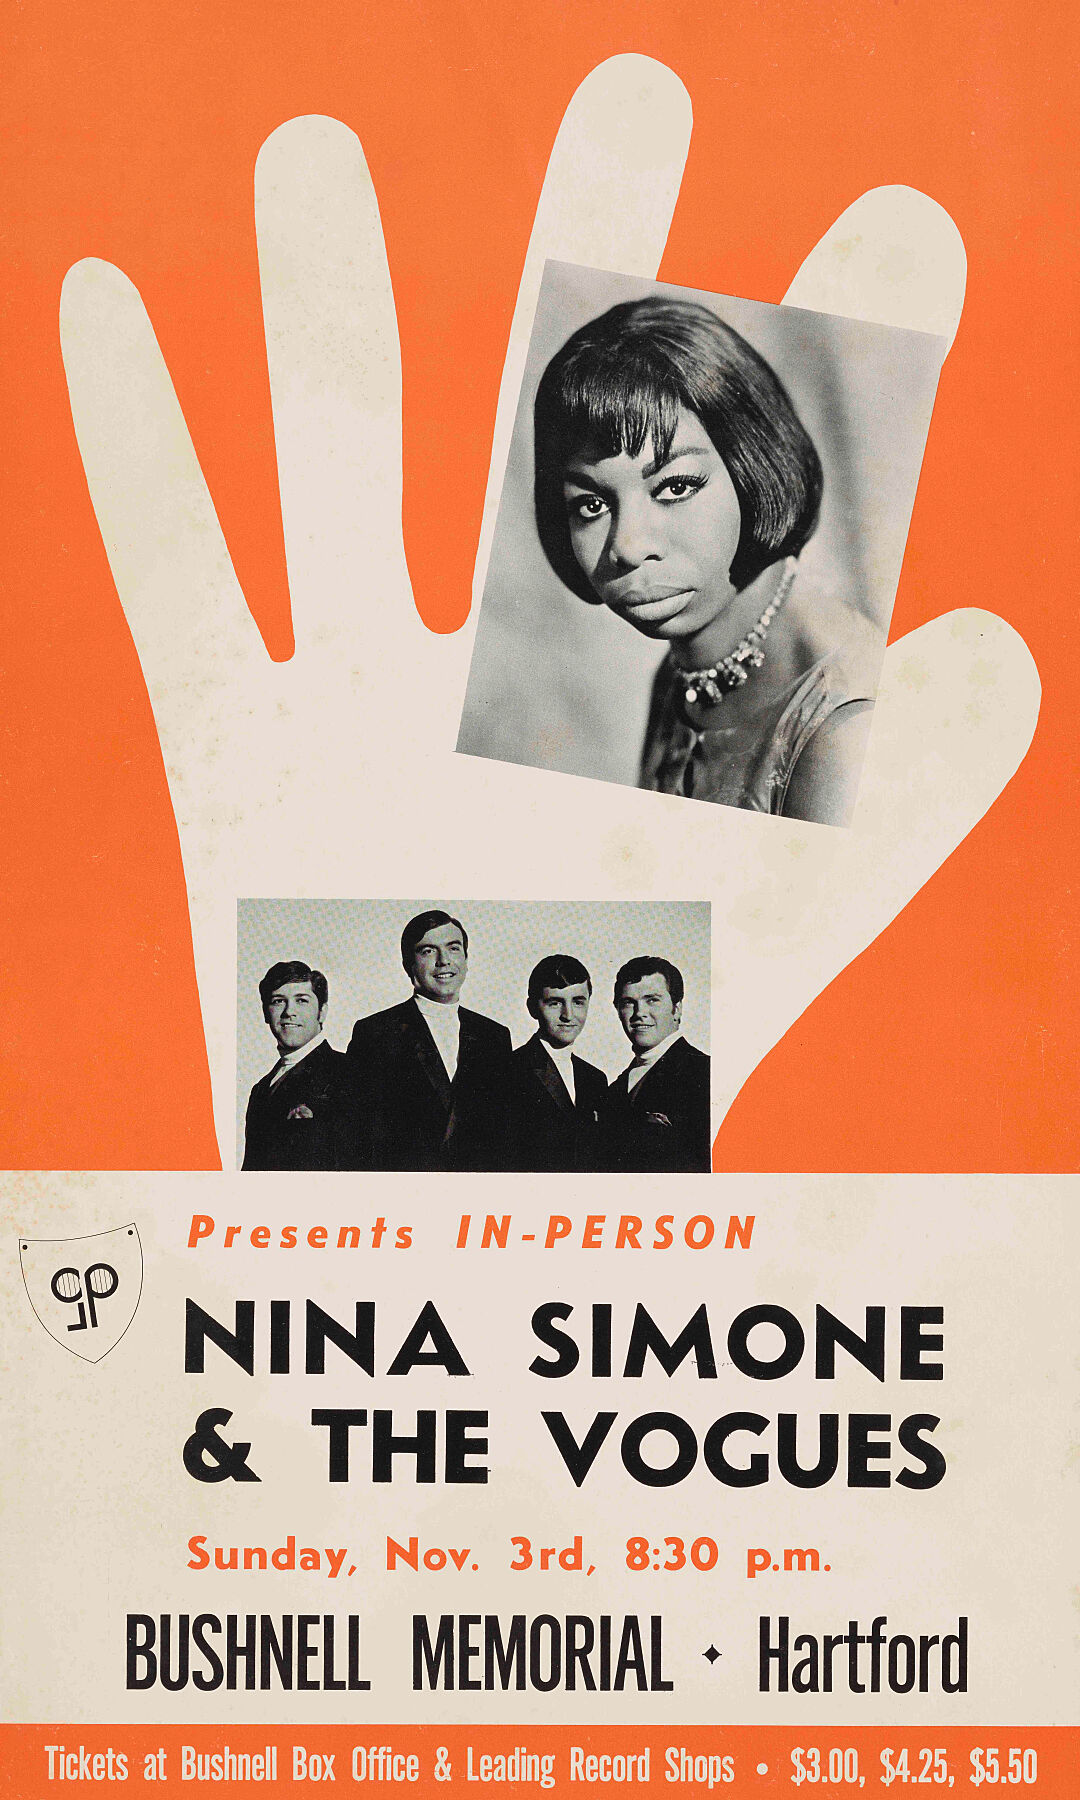 Poster for a concert by Nina Simone and The Vogues at Bushnell Memorial in Hartford, Connecticut, November 1968